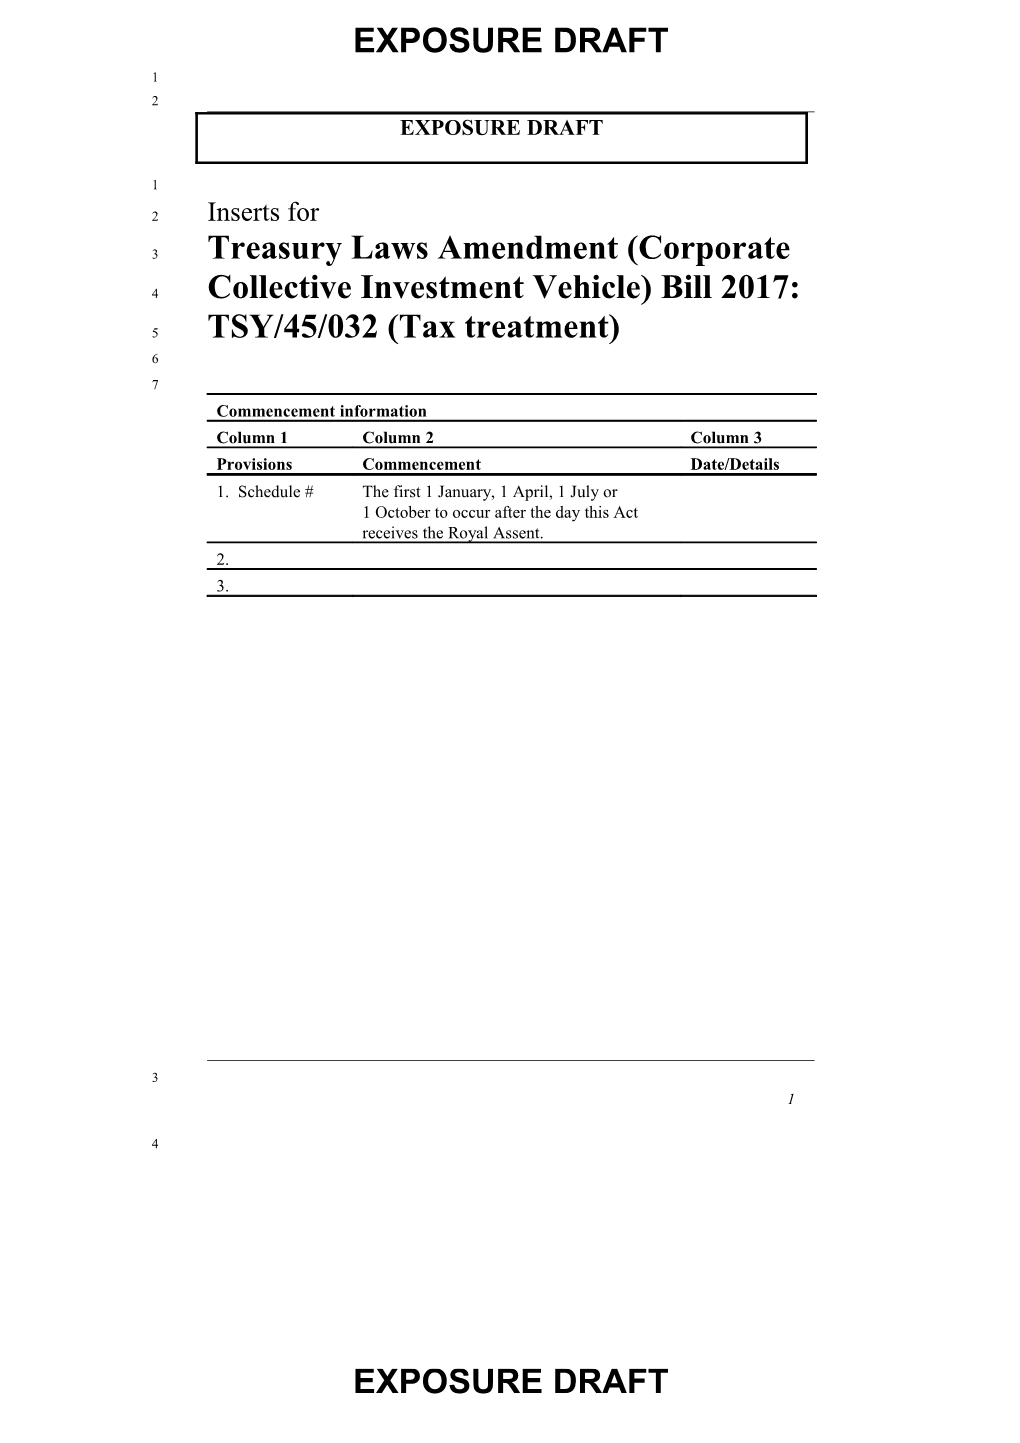 Treasury Laws Amendment (Corporate Collective Investment Vehicle) Bill 2017: TSY/45/032